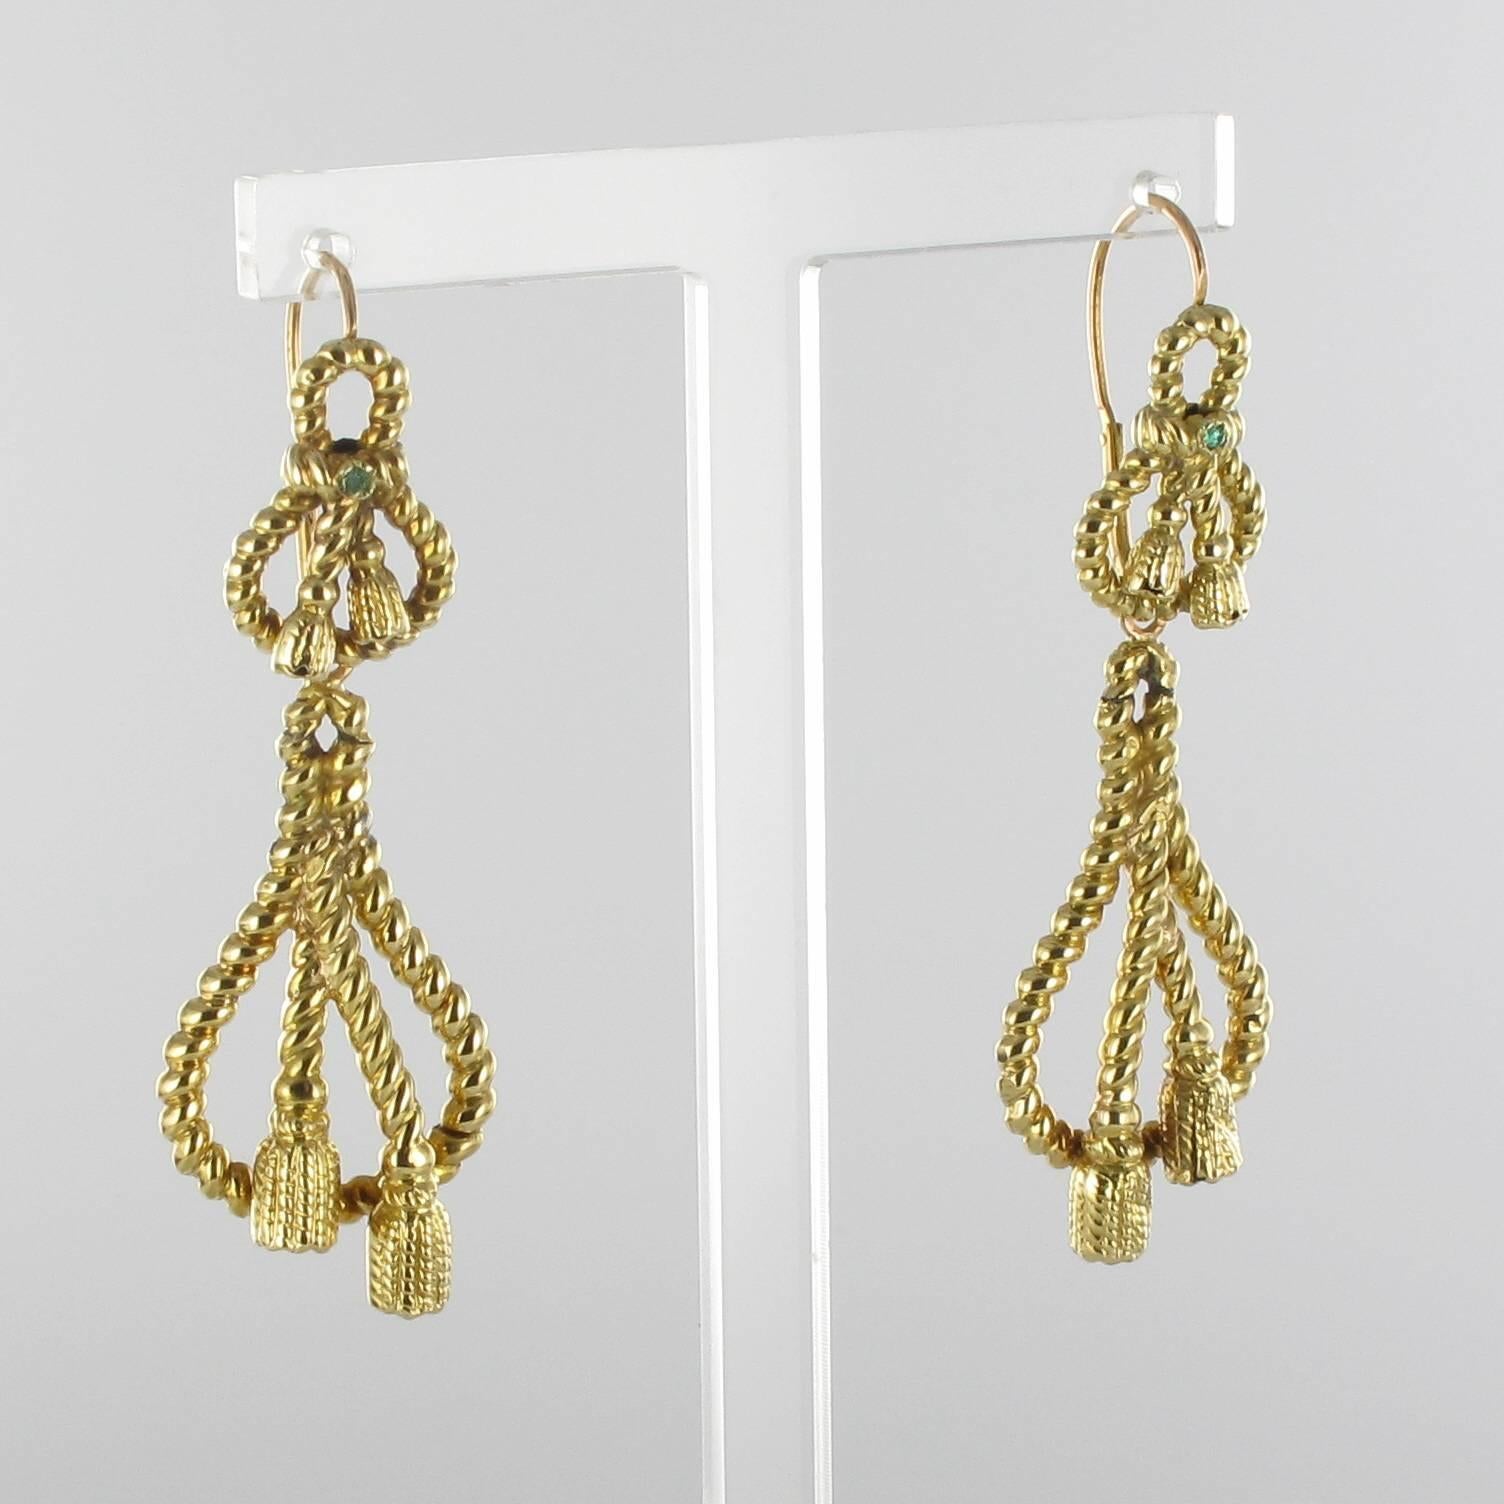 Earrings in 18 carat yellow gold, eagle head hallmark. 
These antique drop earrings are each composed of a coiled gold rope that terminates with golden tassels and feature a round emerald at the centre. These antique earrings hold a pendant with the